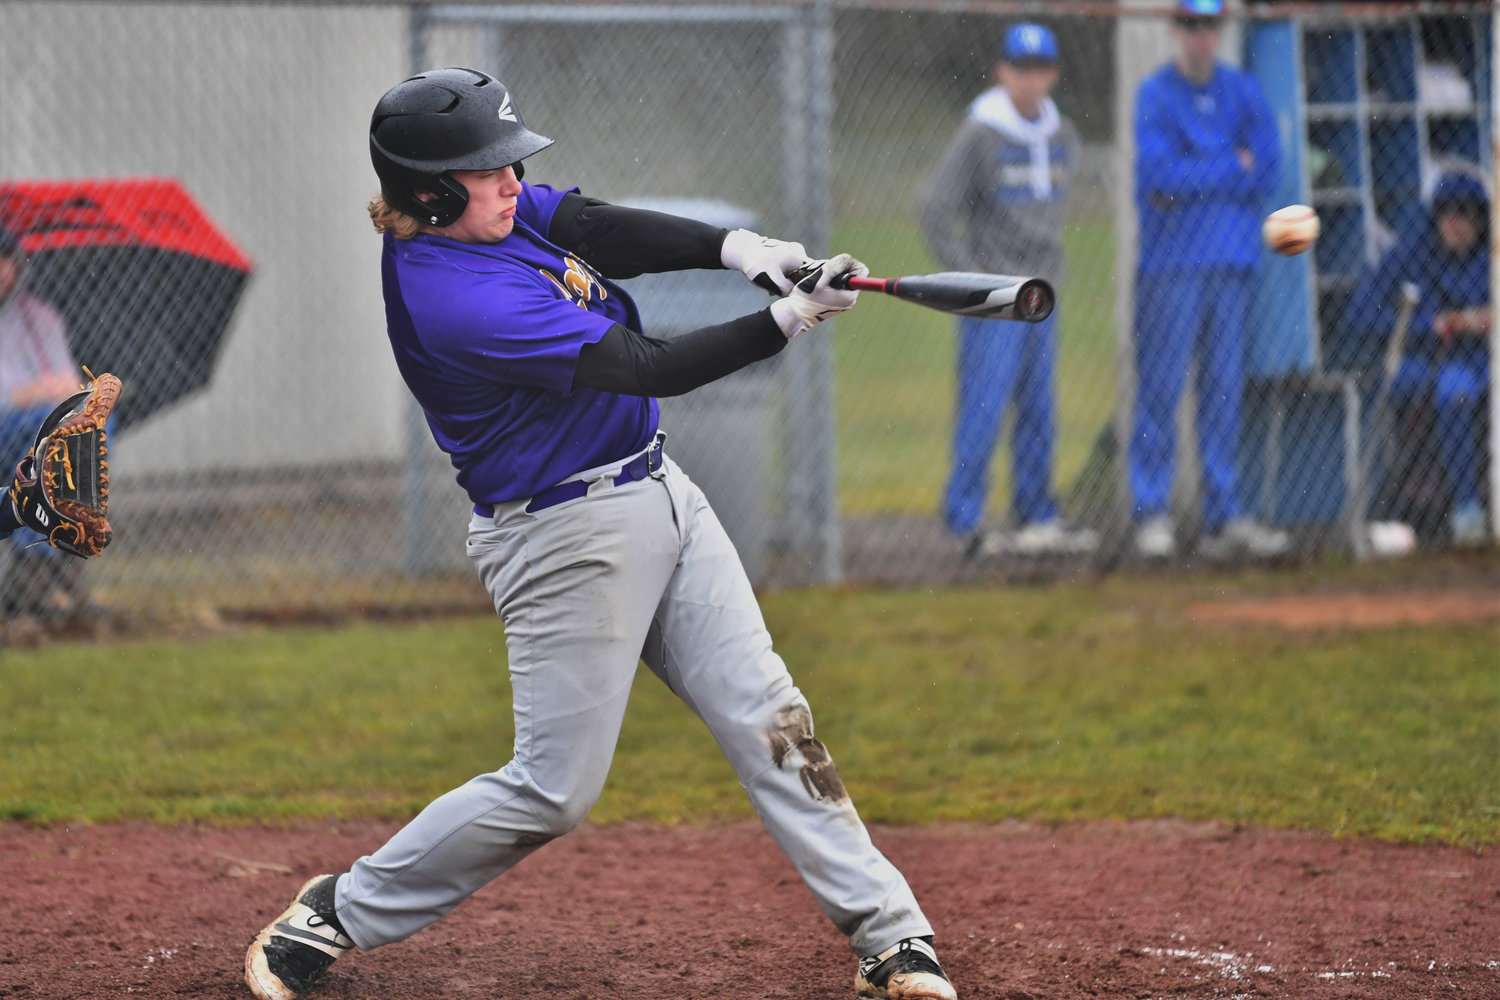 Onalaska’s Tuff Lyons makes contact on a Toutle Lake pitch during Game 1 of a road doubleheader in Toutle on Saturday.